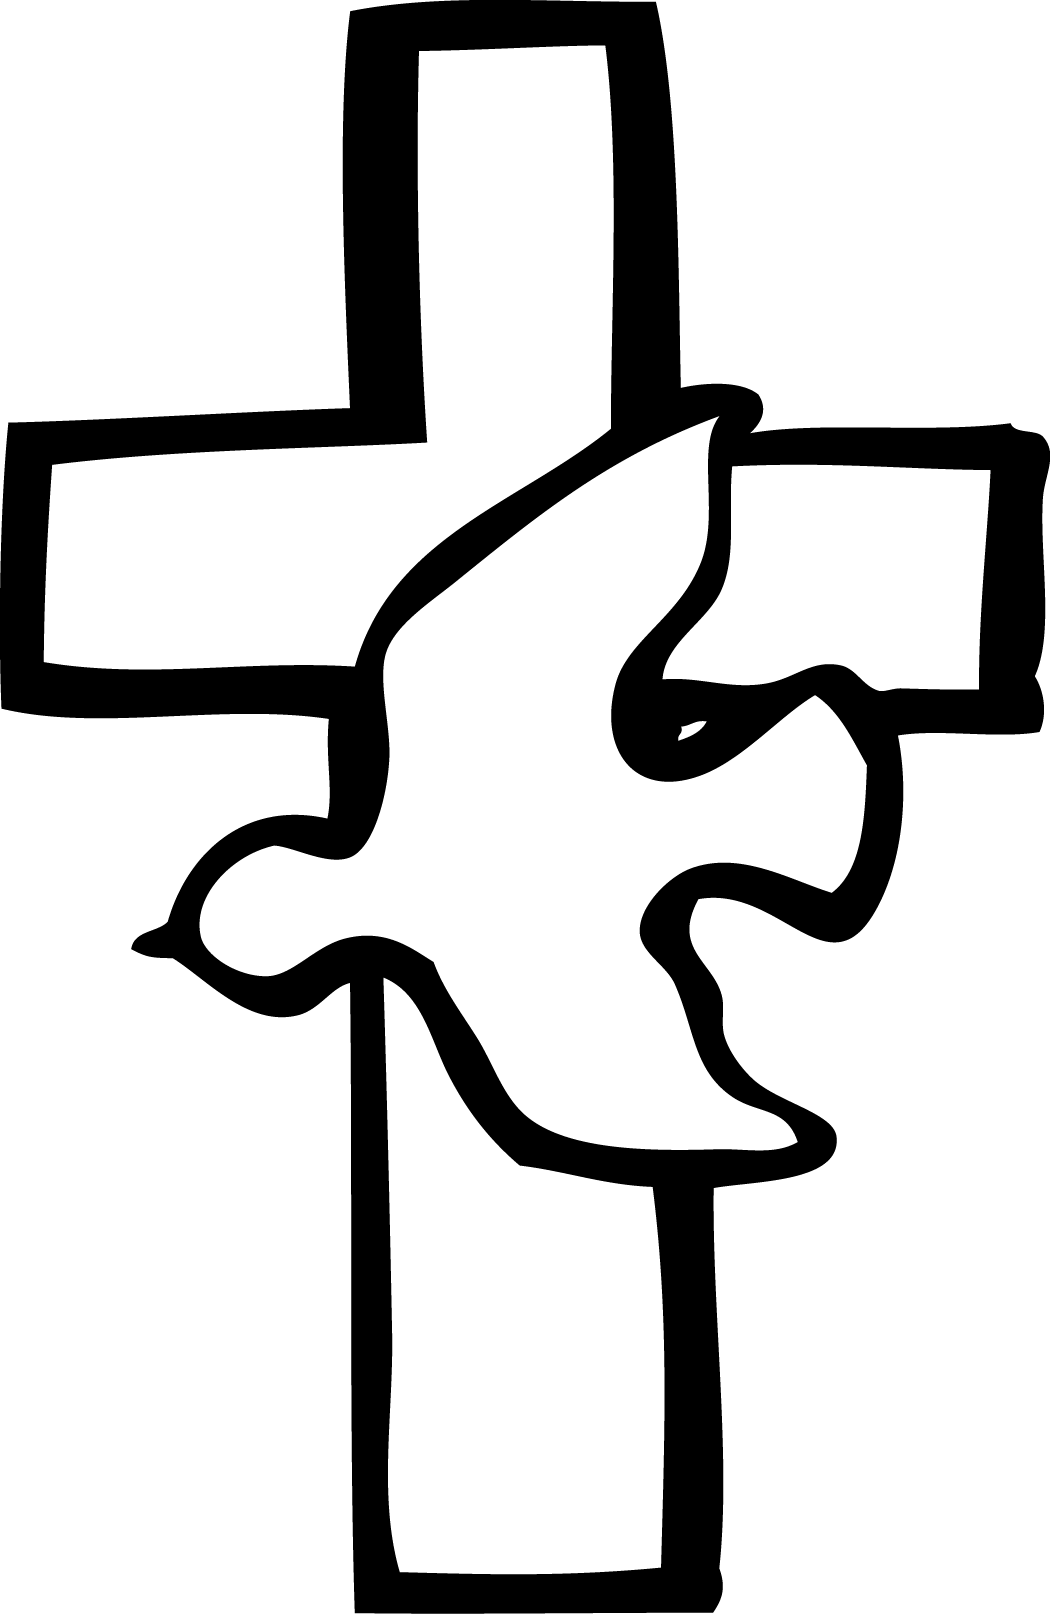 Cross clipart black and white free images 3 - Clipartix